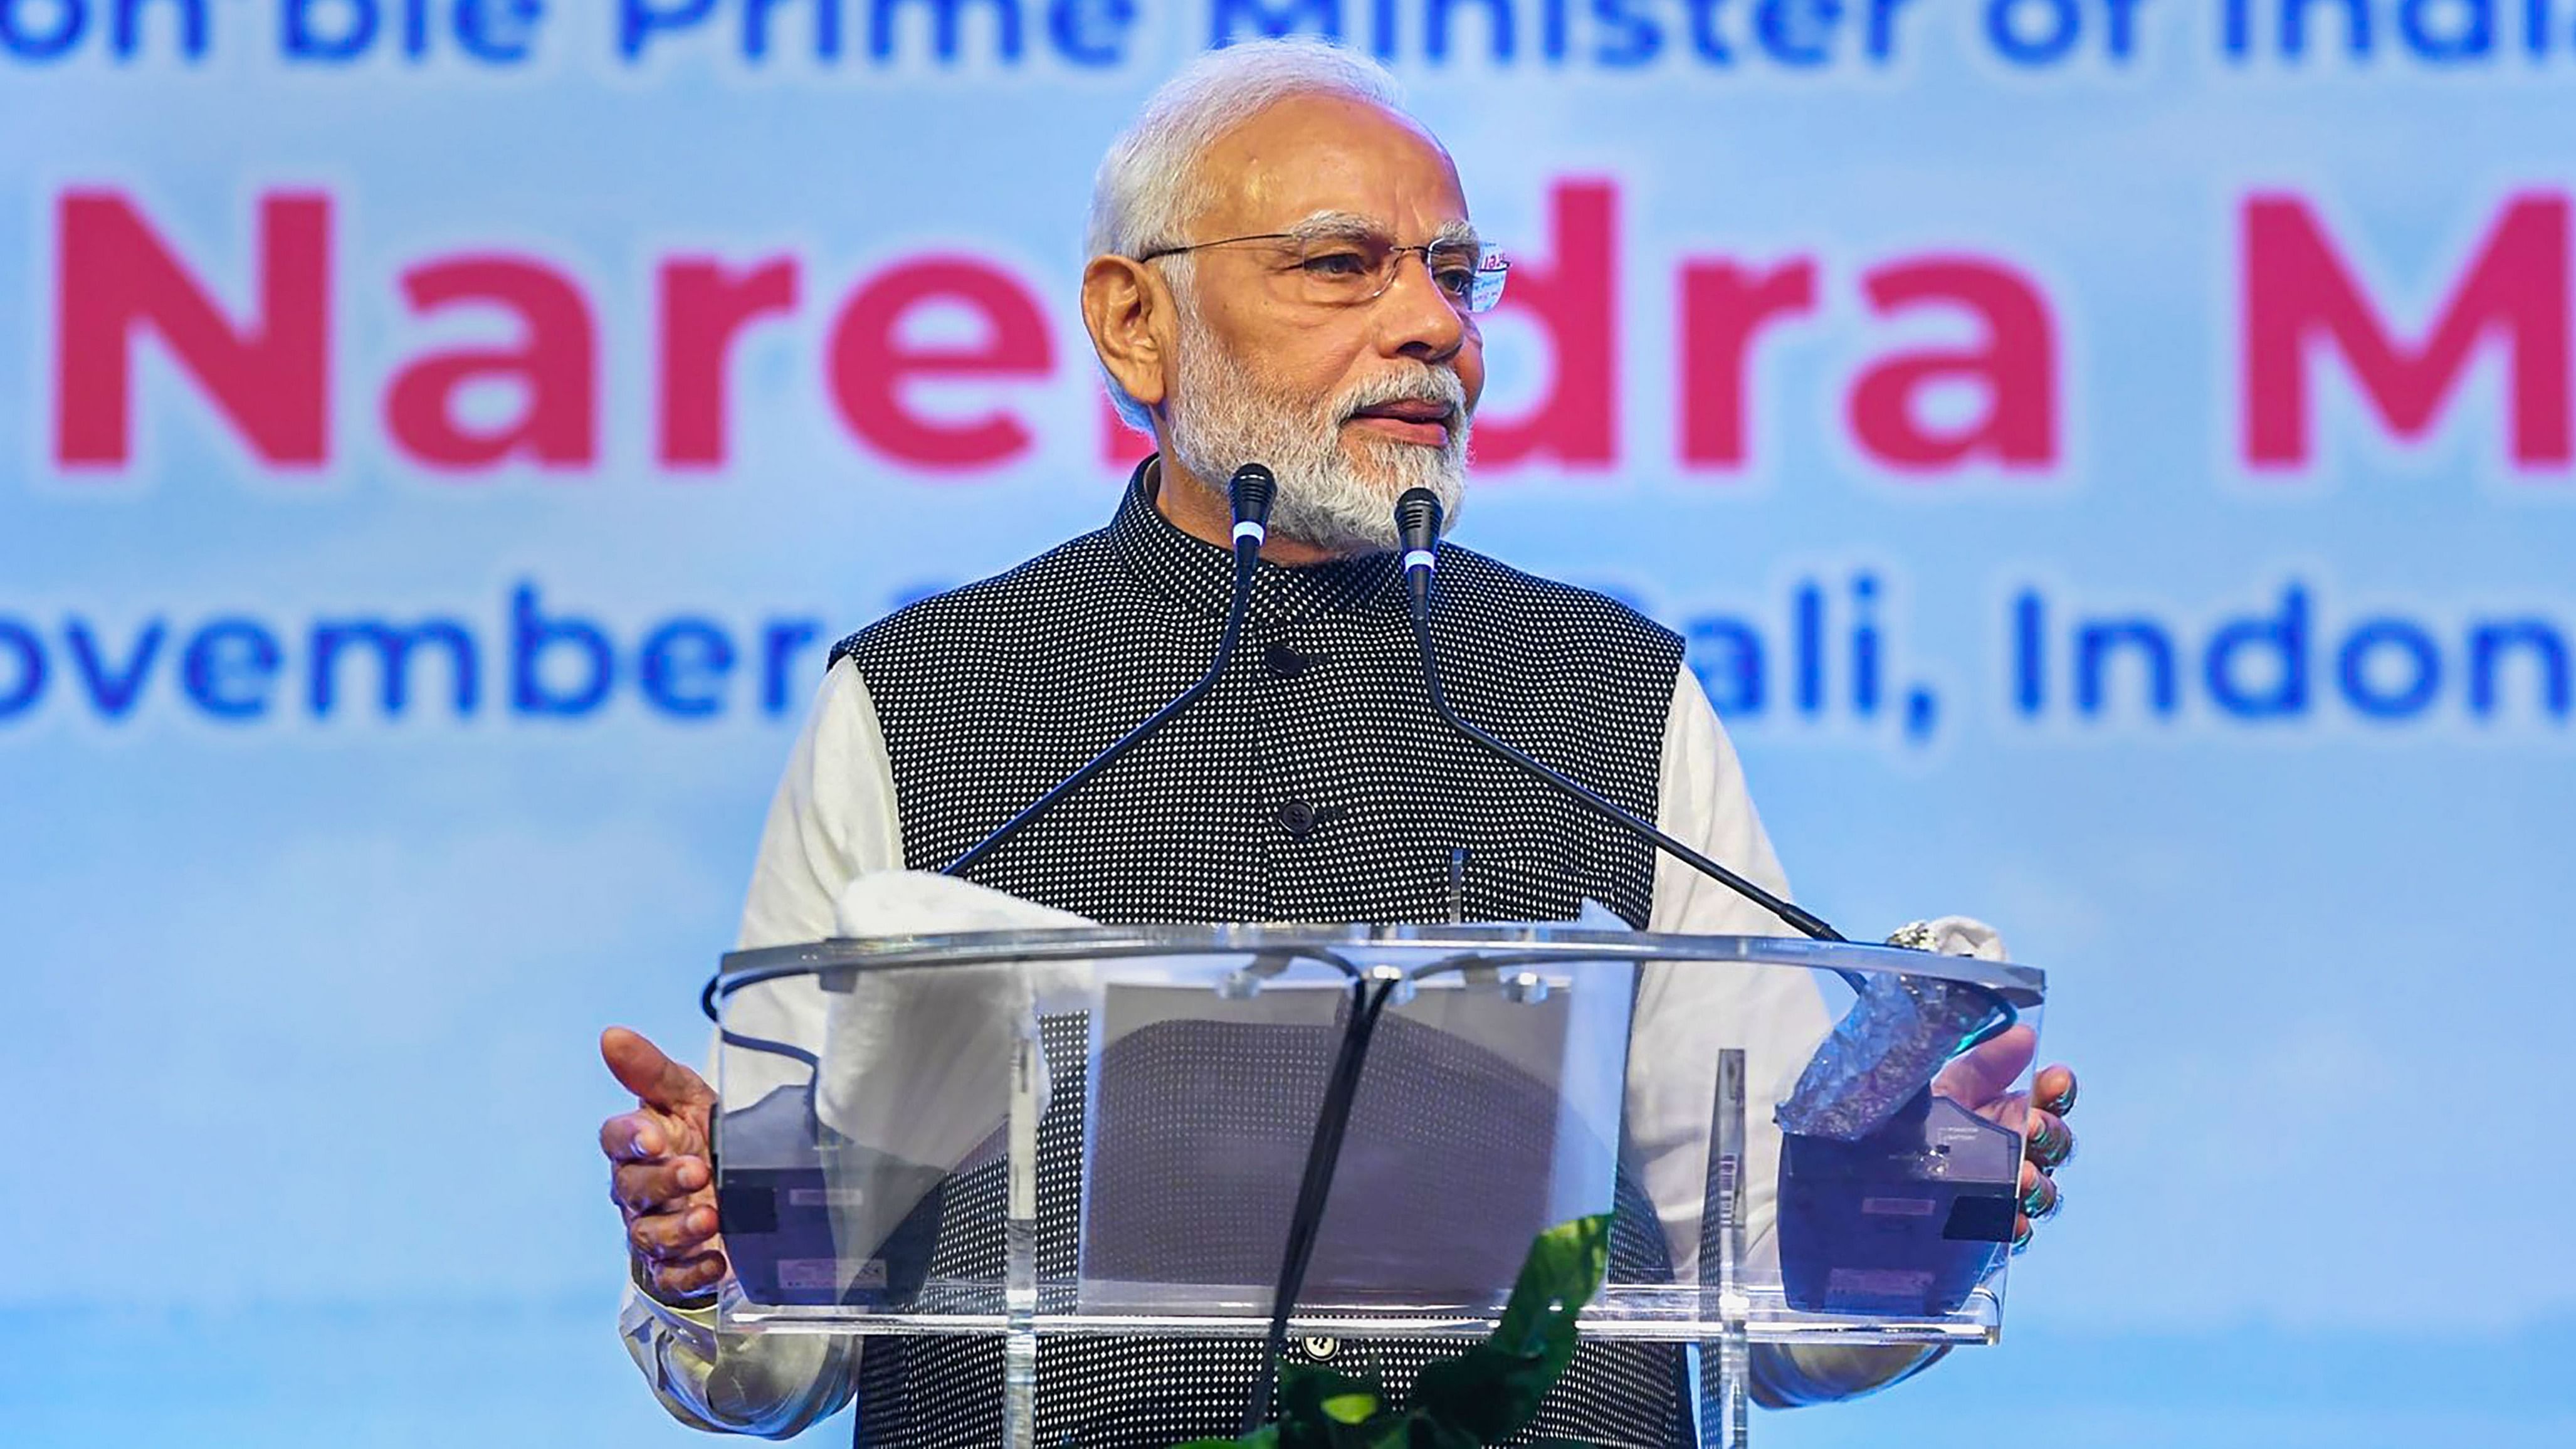 Narendra Modi addresses a community programme on the sidelines of the G20 Summit, in Bali. Credit: PTI Photo